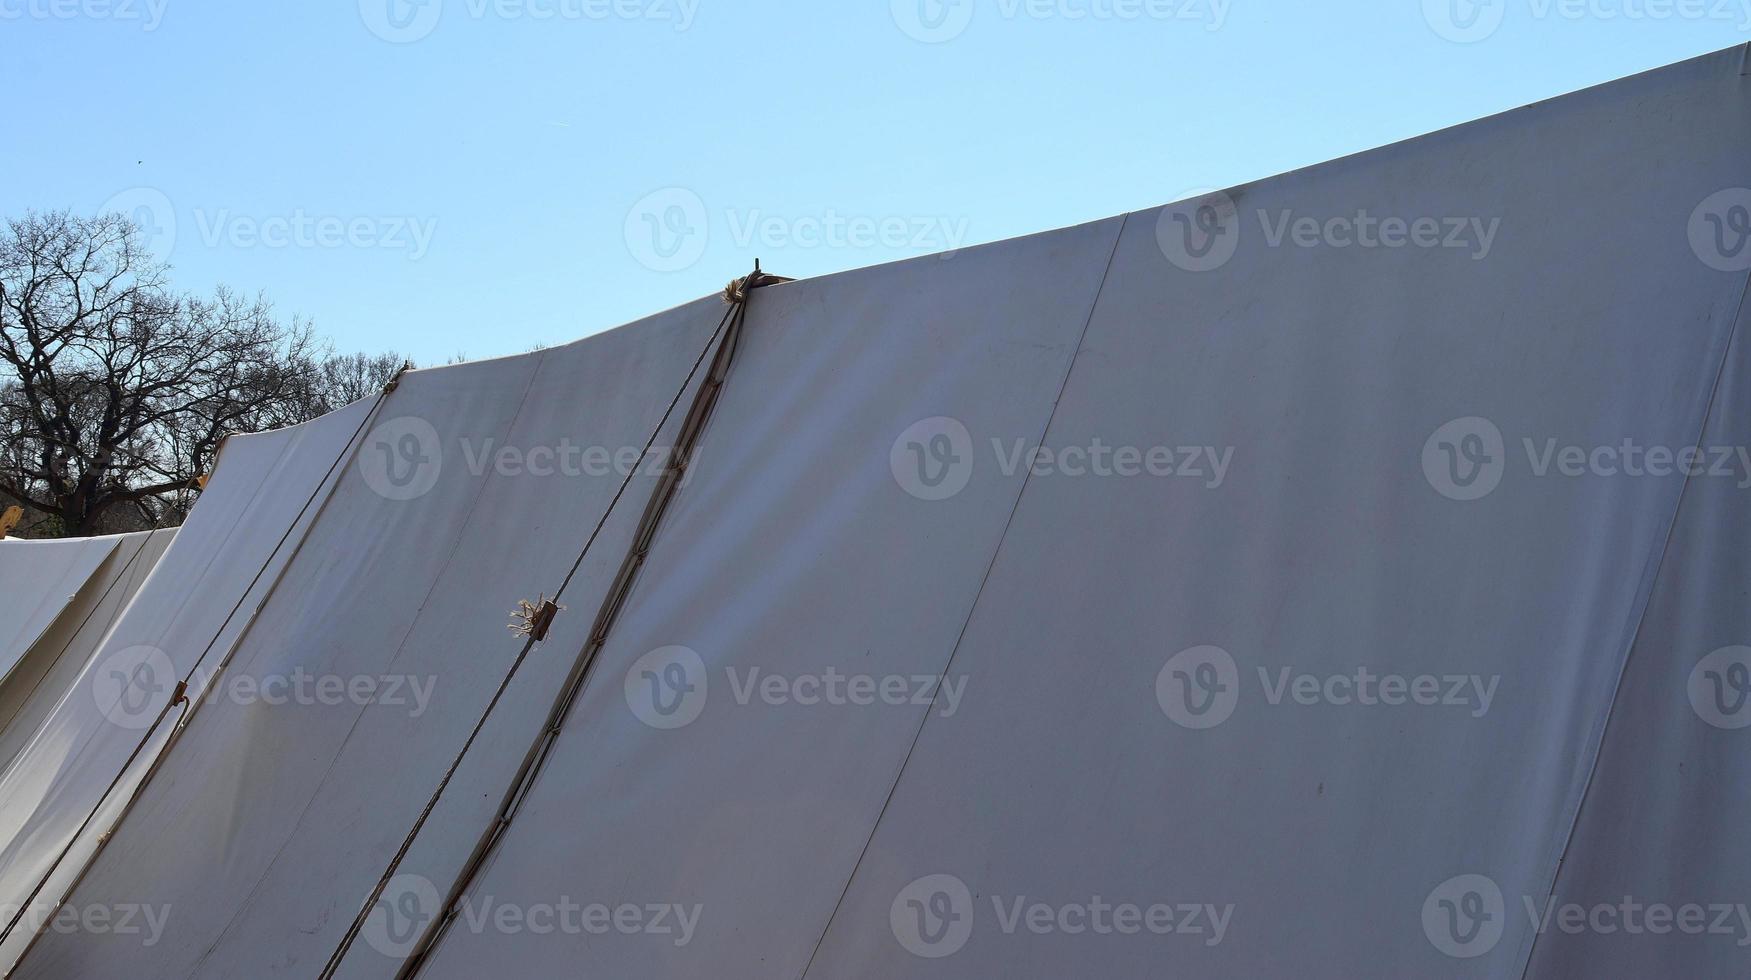 Old vikings tent made of wood and cloth in front of a blue sky photo